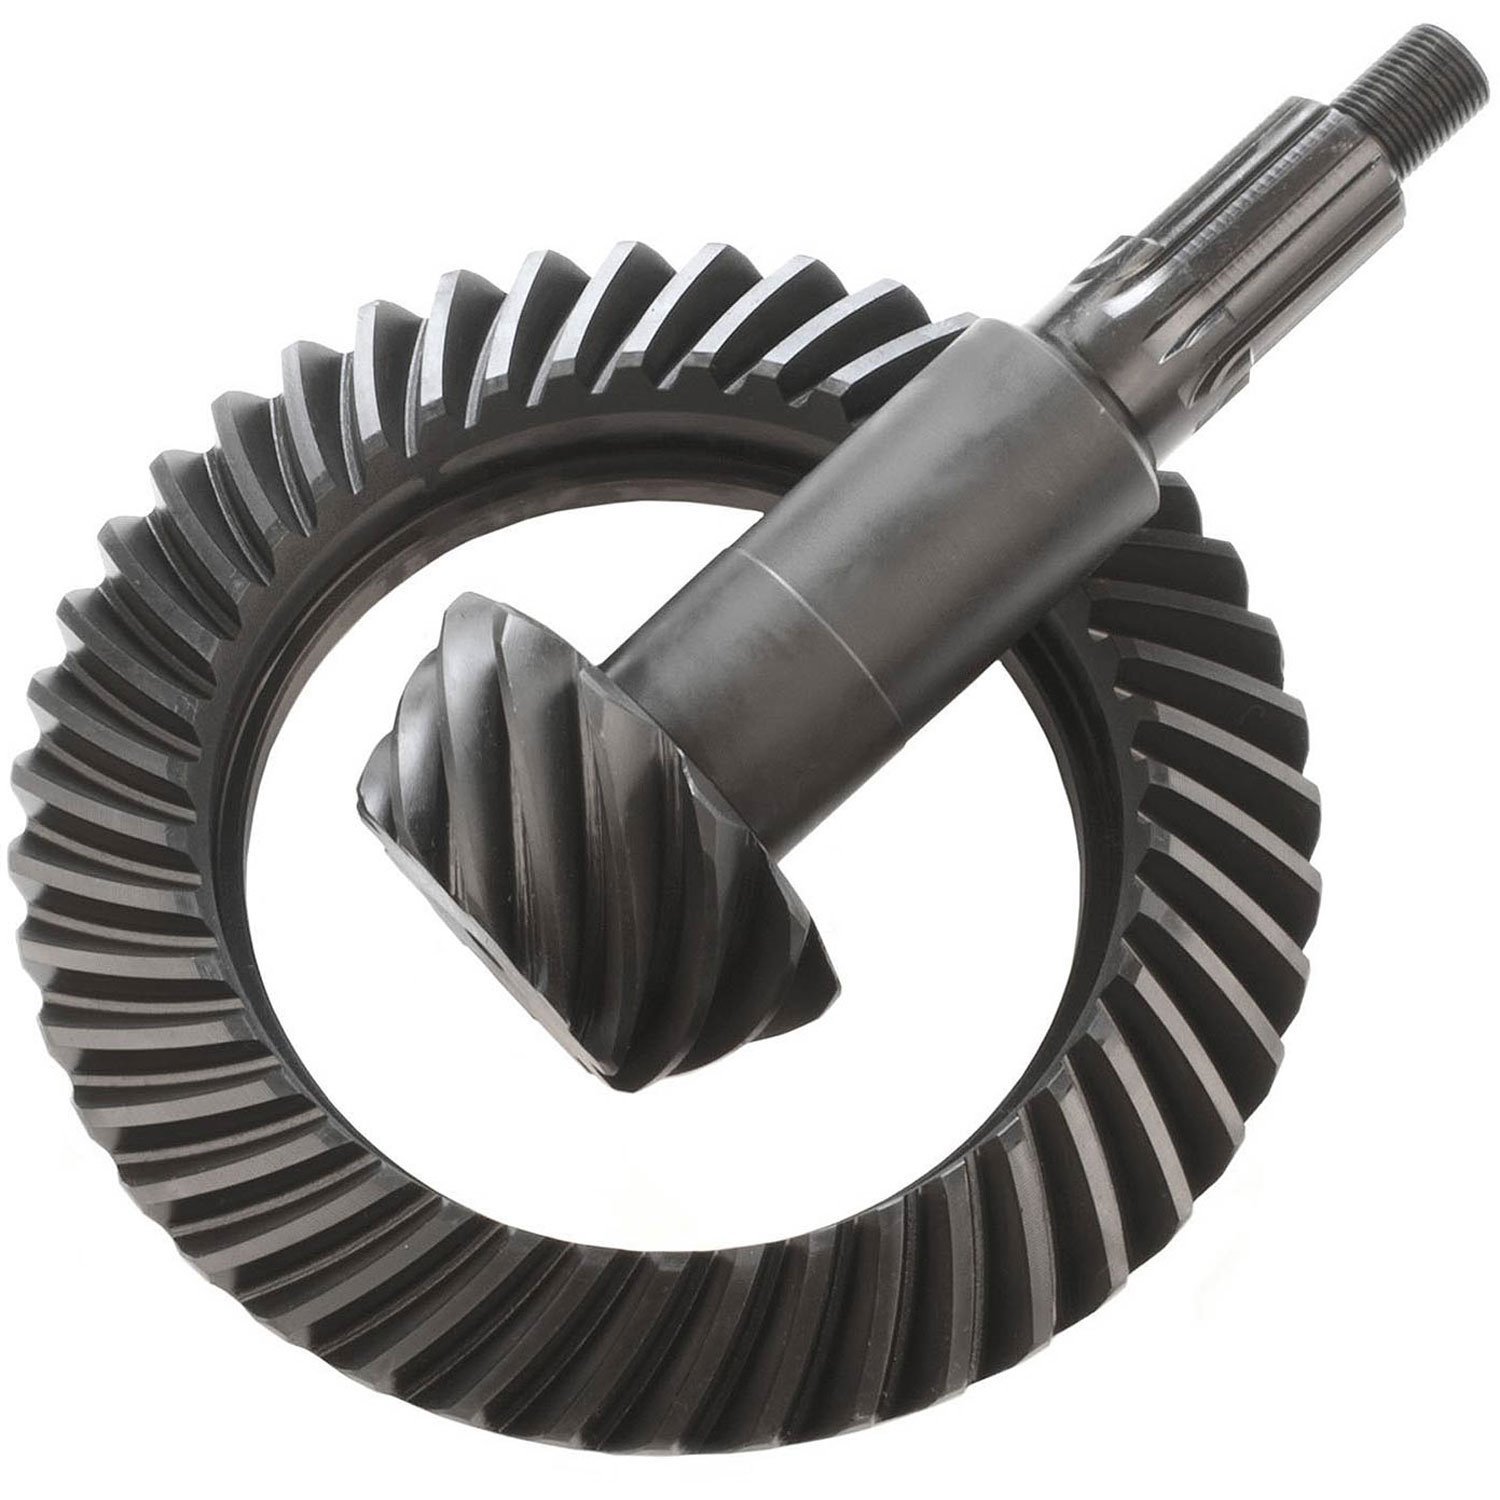 Ring & Pinion Gears Chrysler 8.75" (Early 742 Housing)